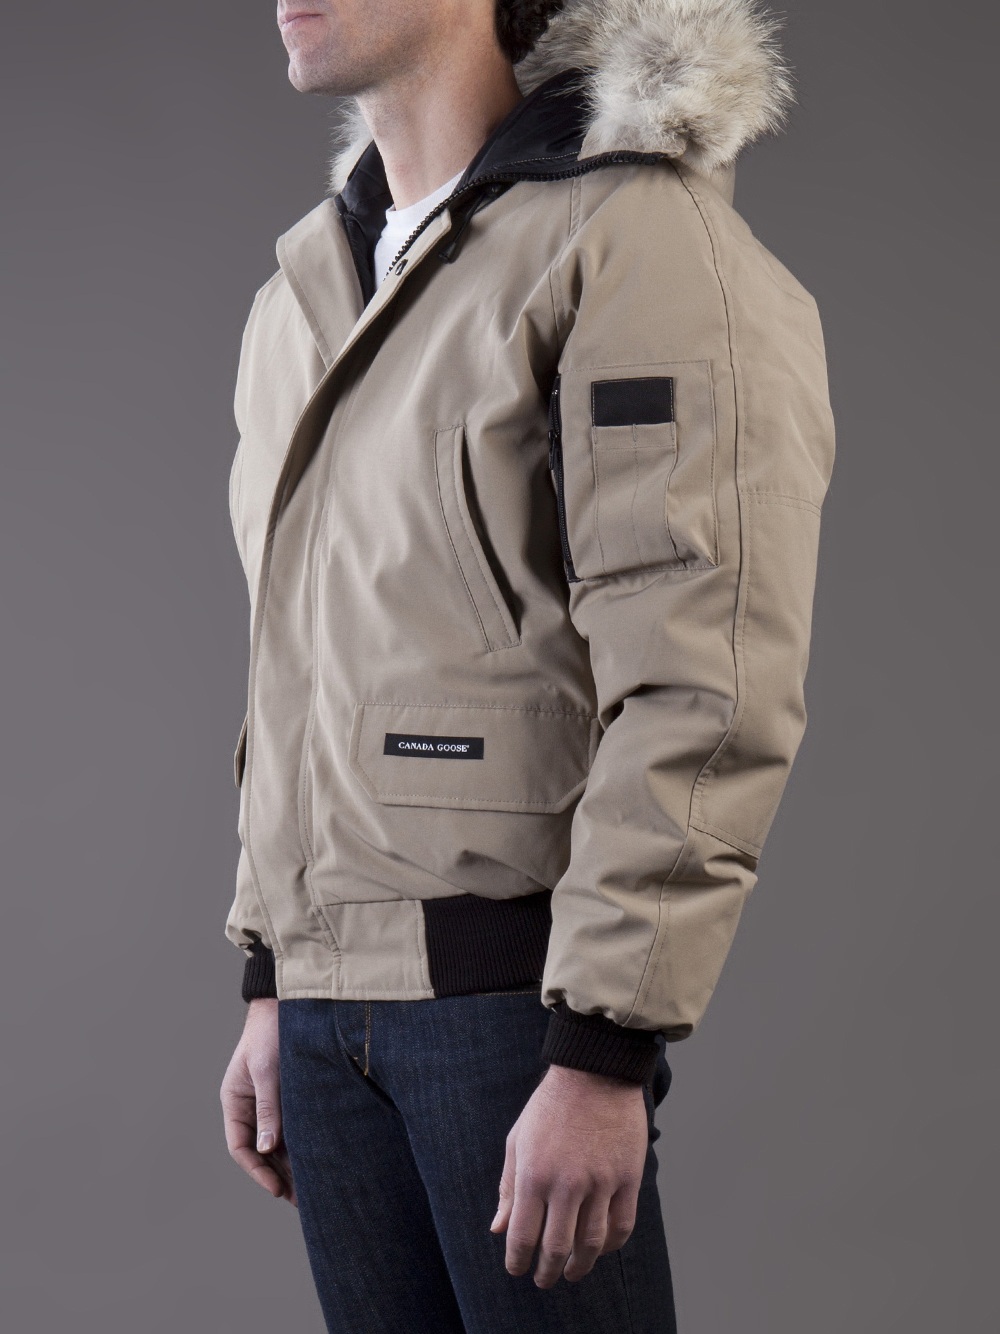 Canada Goose Chilliwack Bomber in Tan (Natural) for Men - Lyst